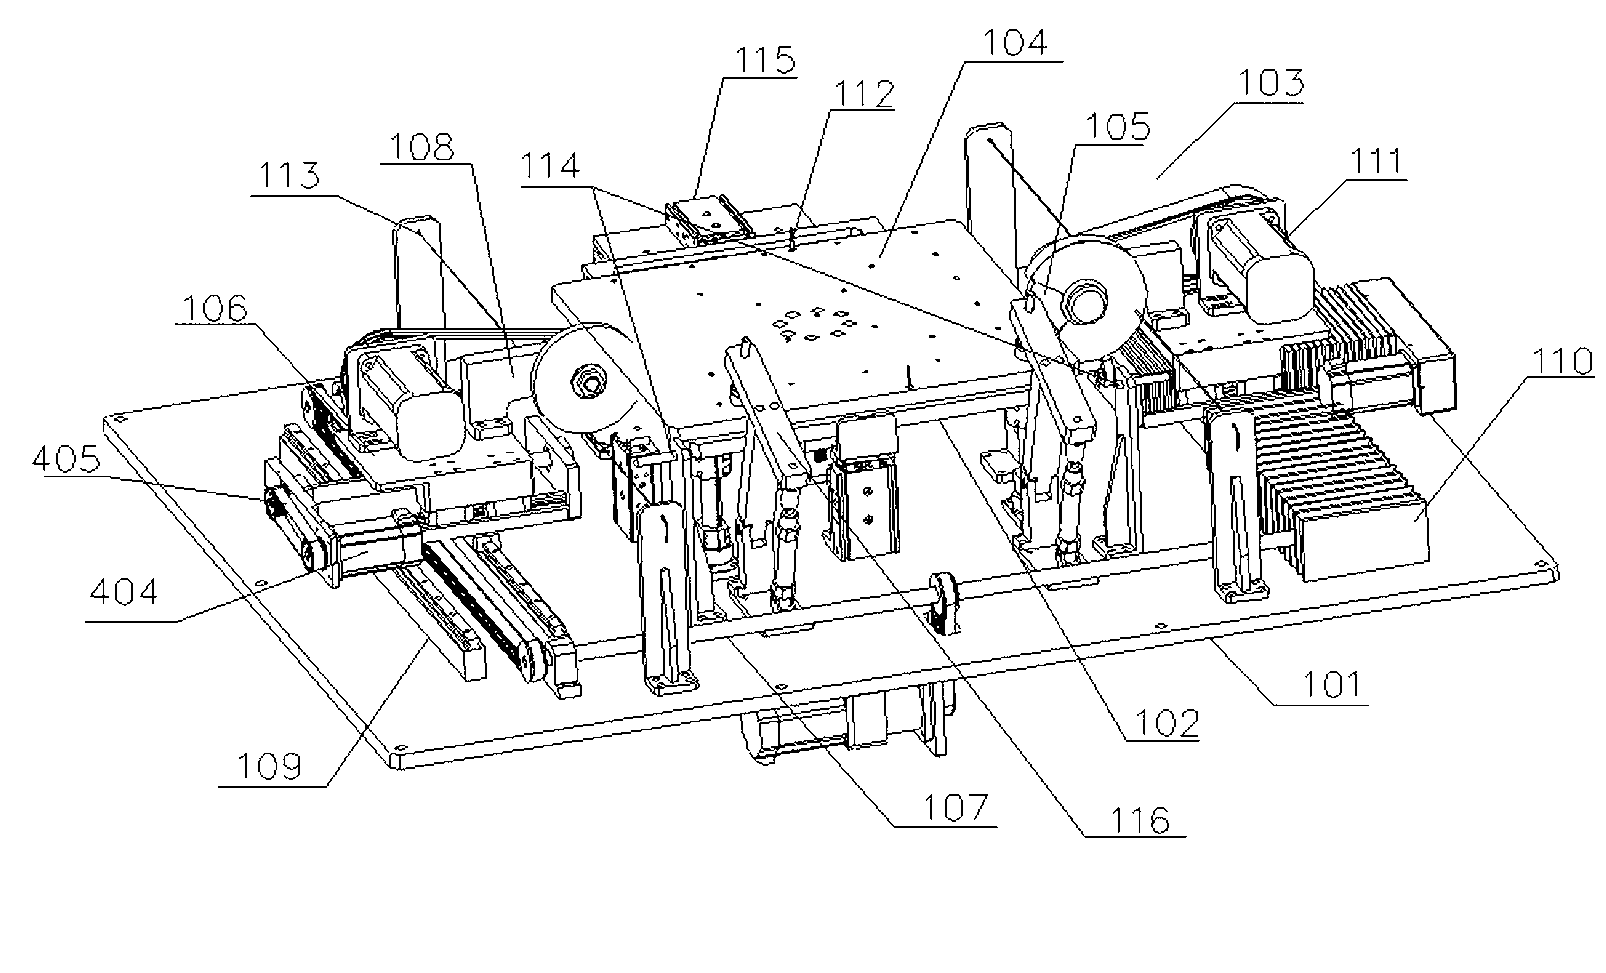 Full-automation grinding machine